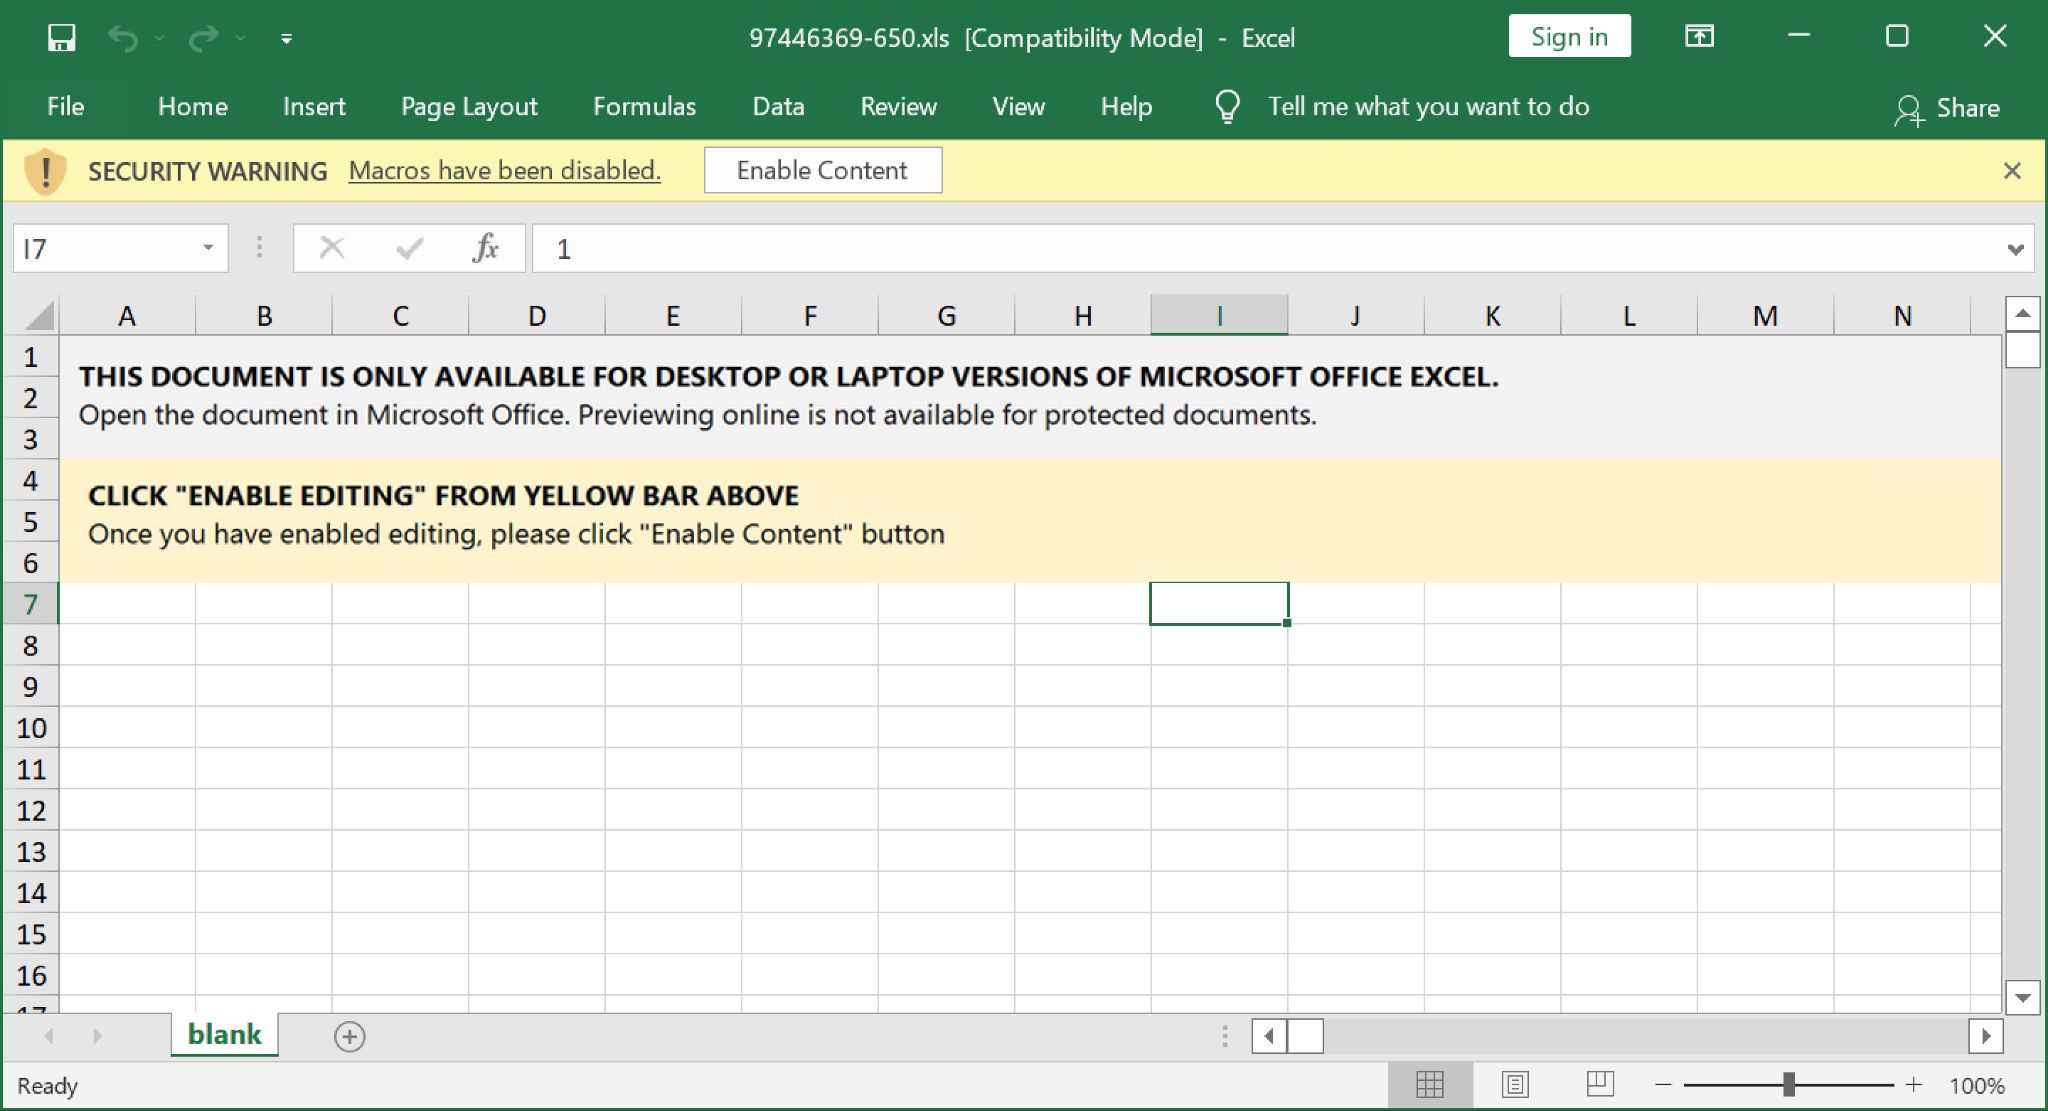 Excel spreadsheet for Emotet downloaded from fake complaint report web page. Note that the spreadsheet attempts to trick the user into enabling macros. 